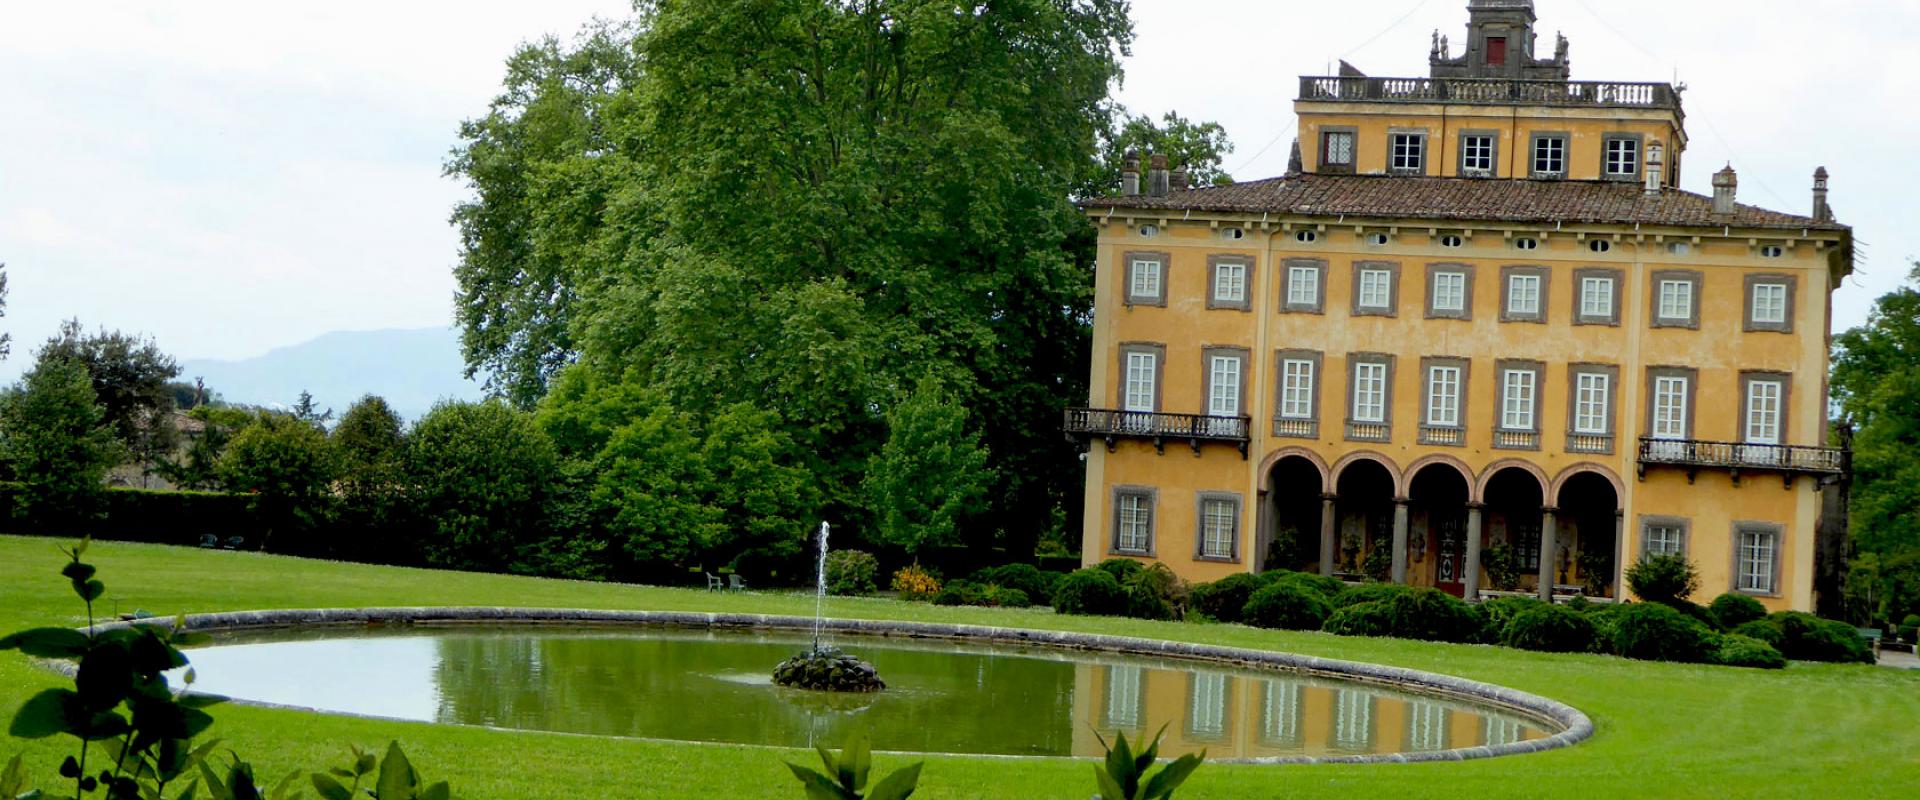 Guided walking tour of Lucca countryside and Villa Torrigiani